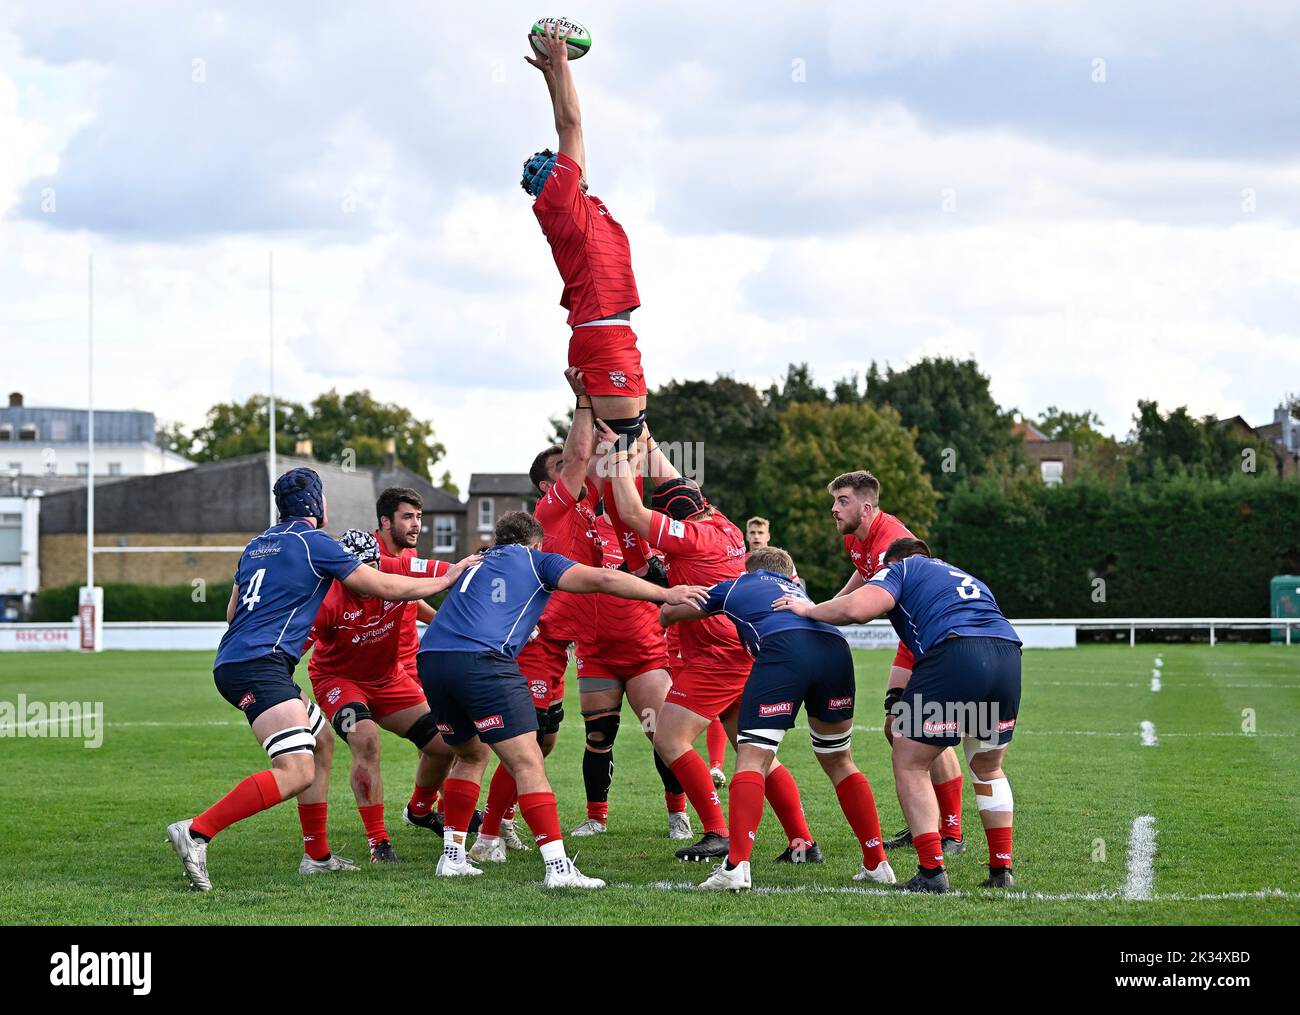 Richmond, United Kingdom. 24th Sep, 2022. Championship Rugby. London Scottish V Jersey Reds. The Richmond Athletic Ground. Richmond. James Scott (Jersey Reds) collects at the lineout during the London Scottish V Jersey Reds championship rugby match. Credit: Sport In Pictures/Alamy Live News Stock Photo